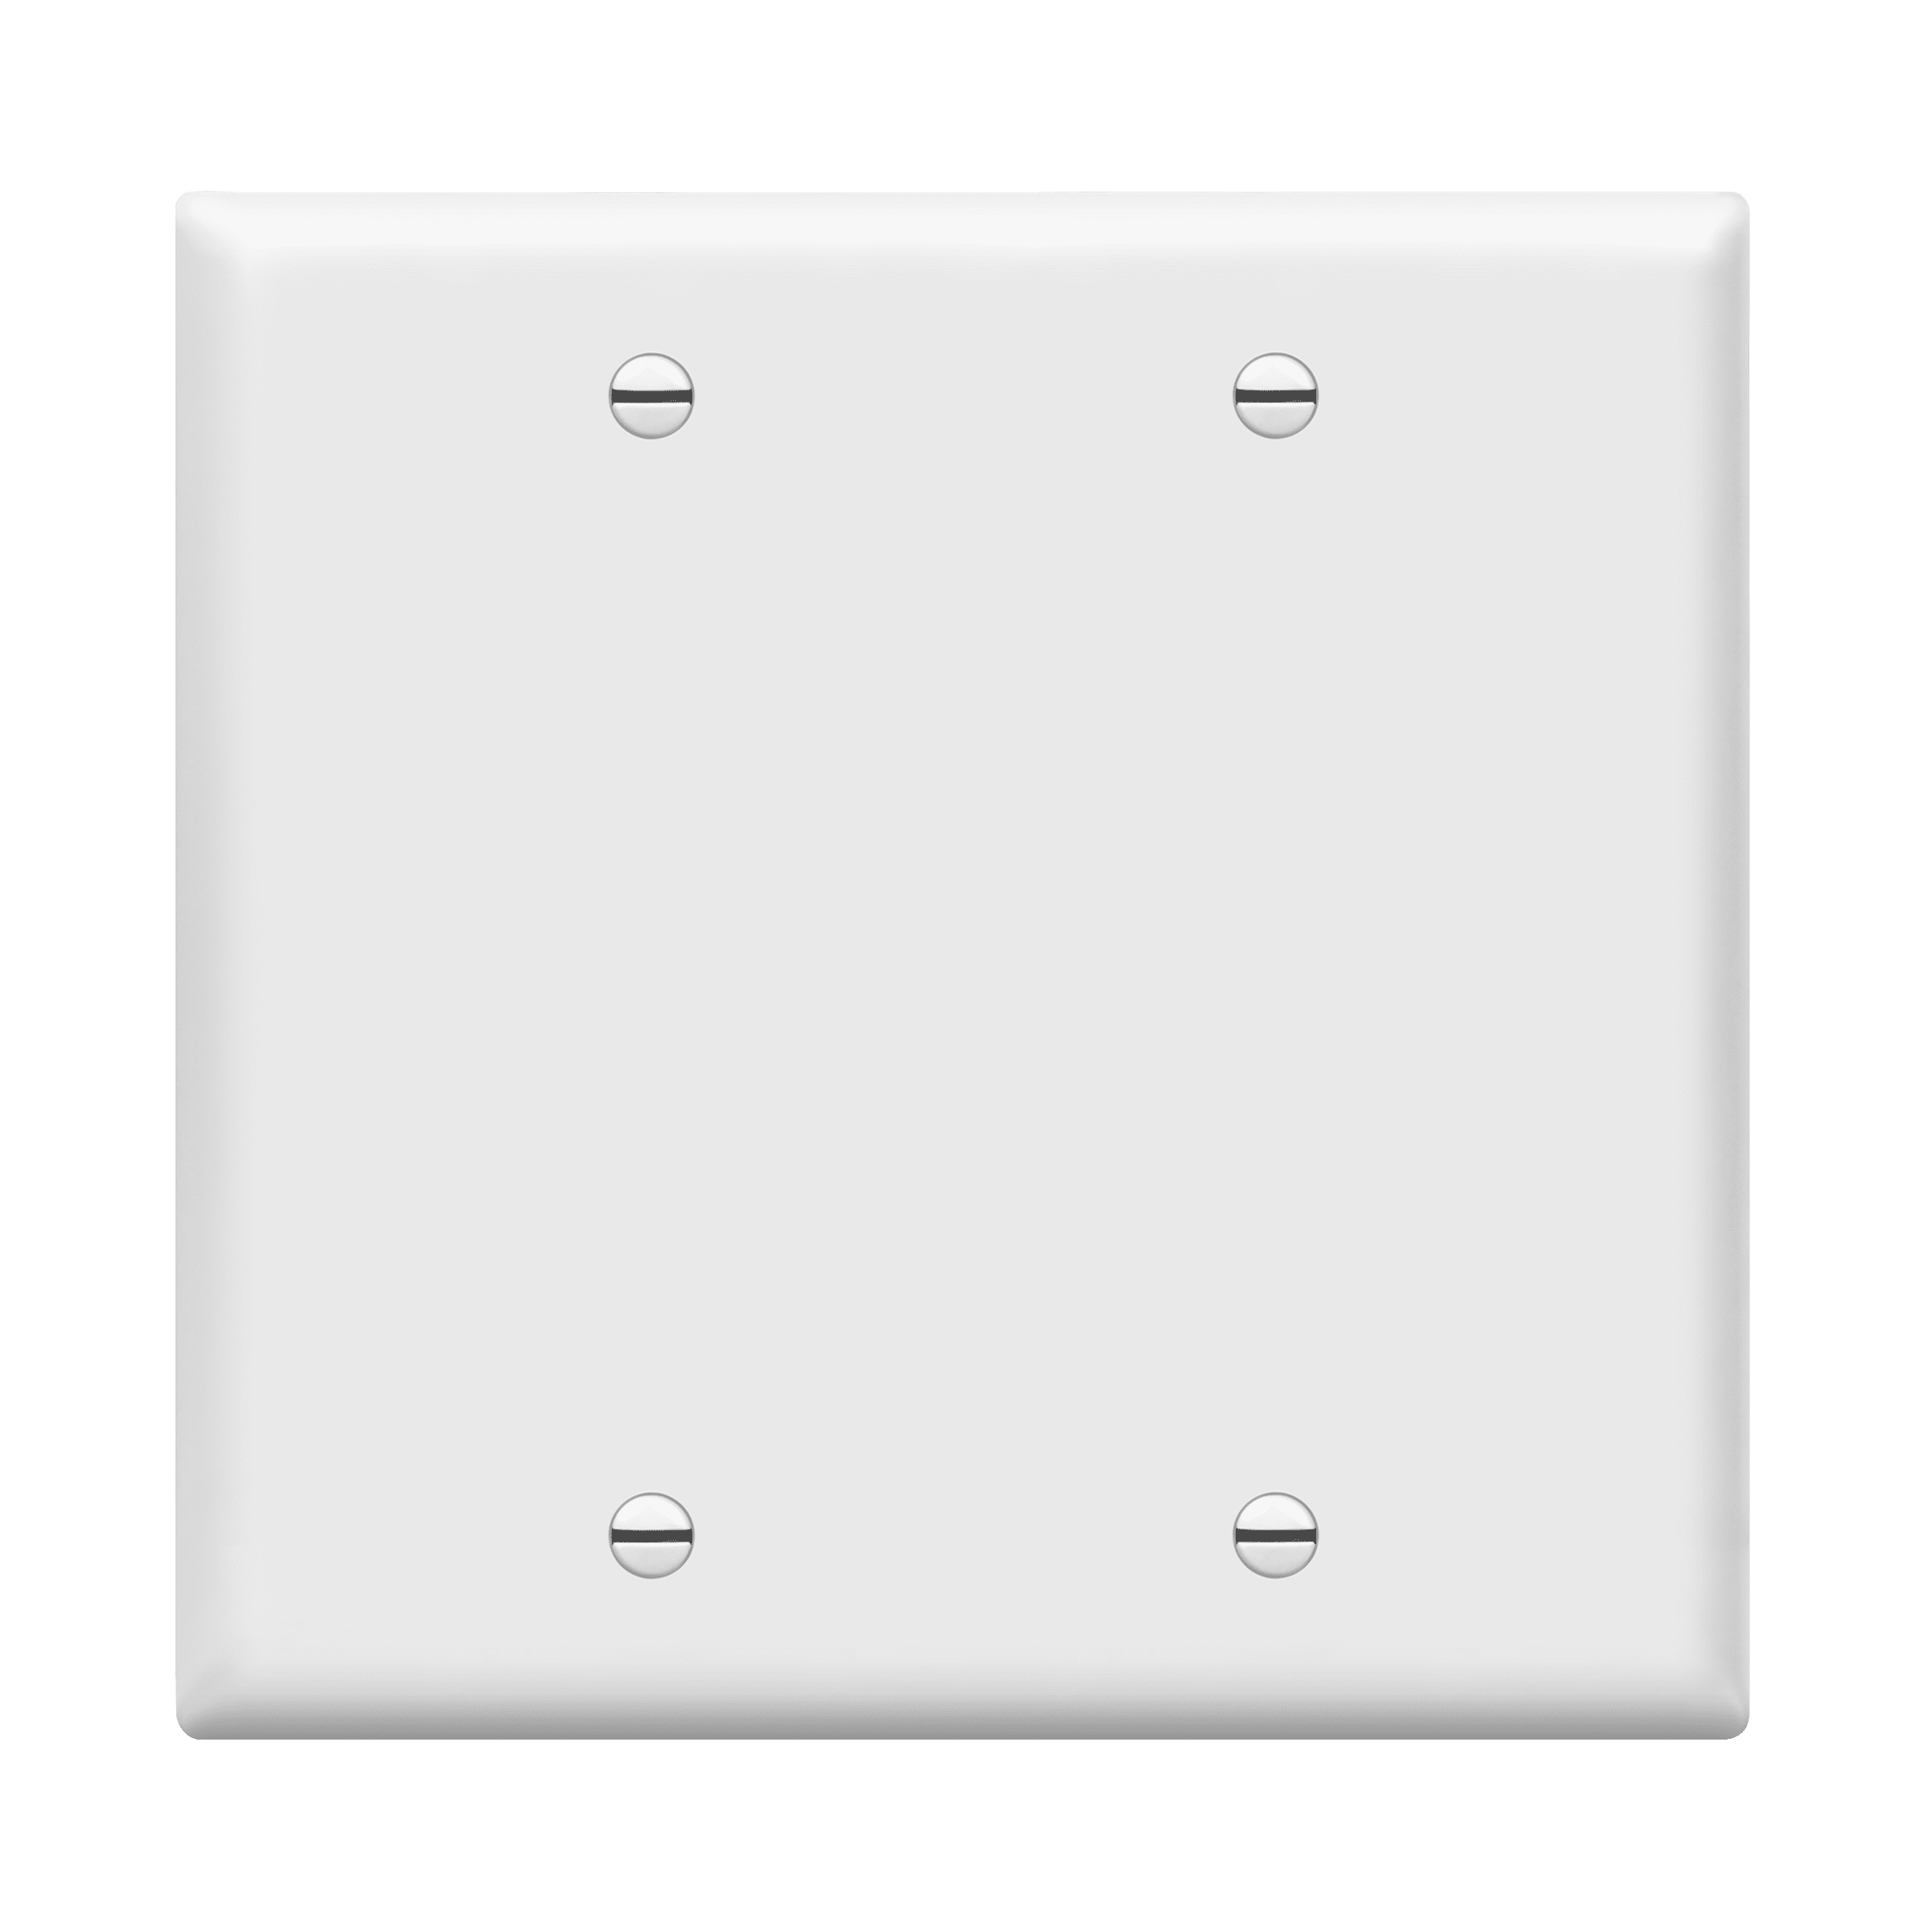 880121-W Polycarbonate Thermoplastic ENERLITES Combination Blank Device/Duplex Receptacle Outlet Wall Plate Size 2-Gang 4.50 x 4.57 White 